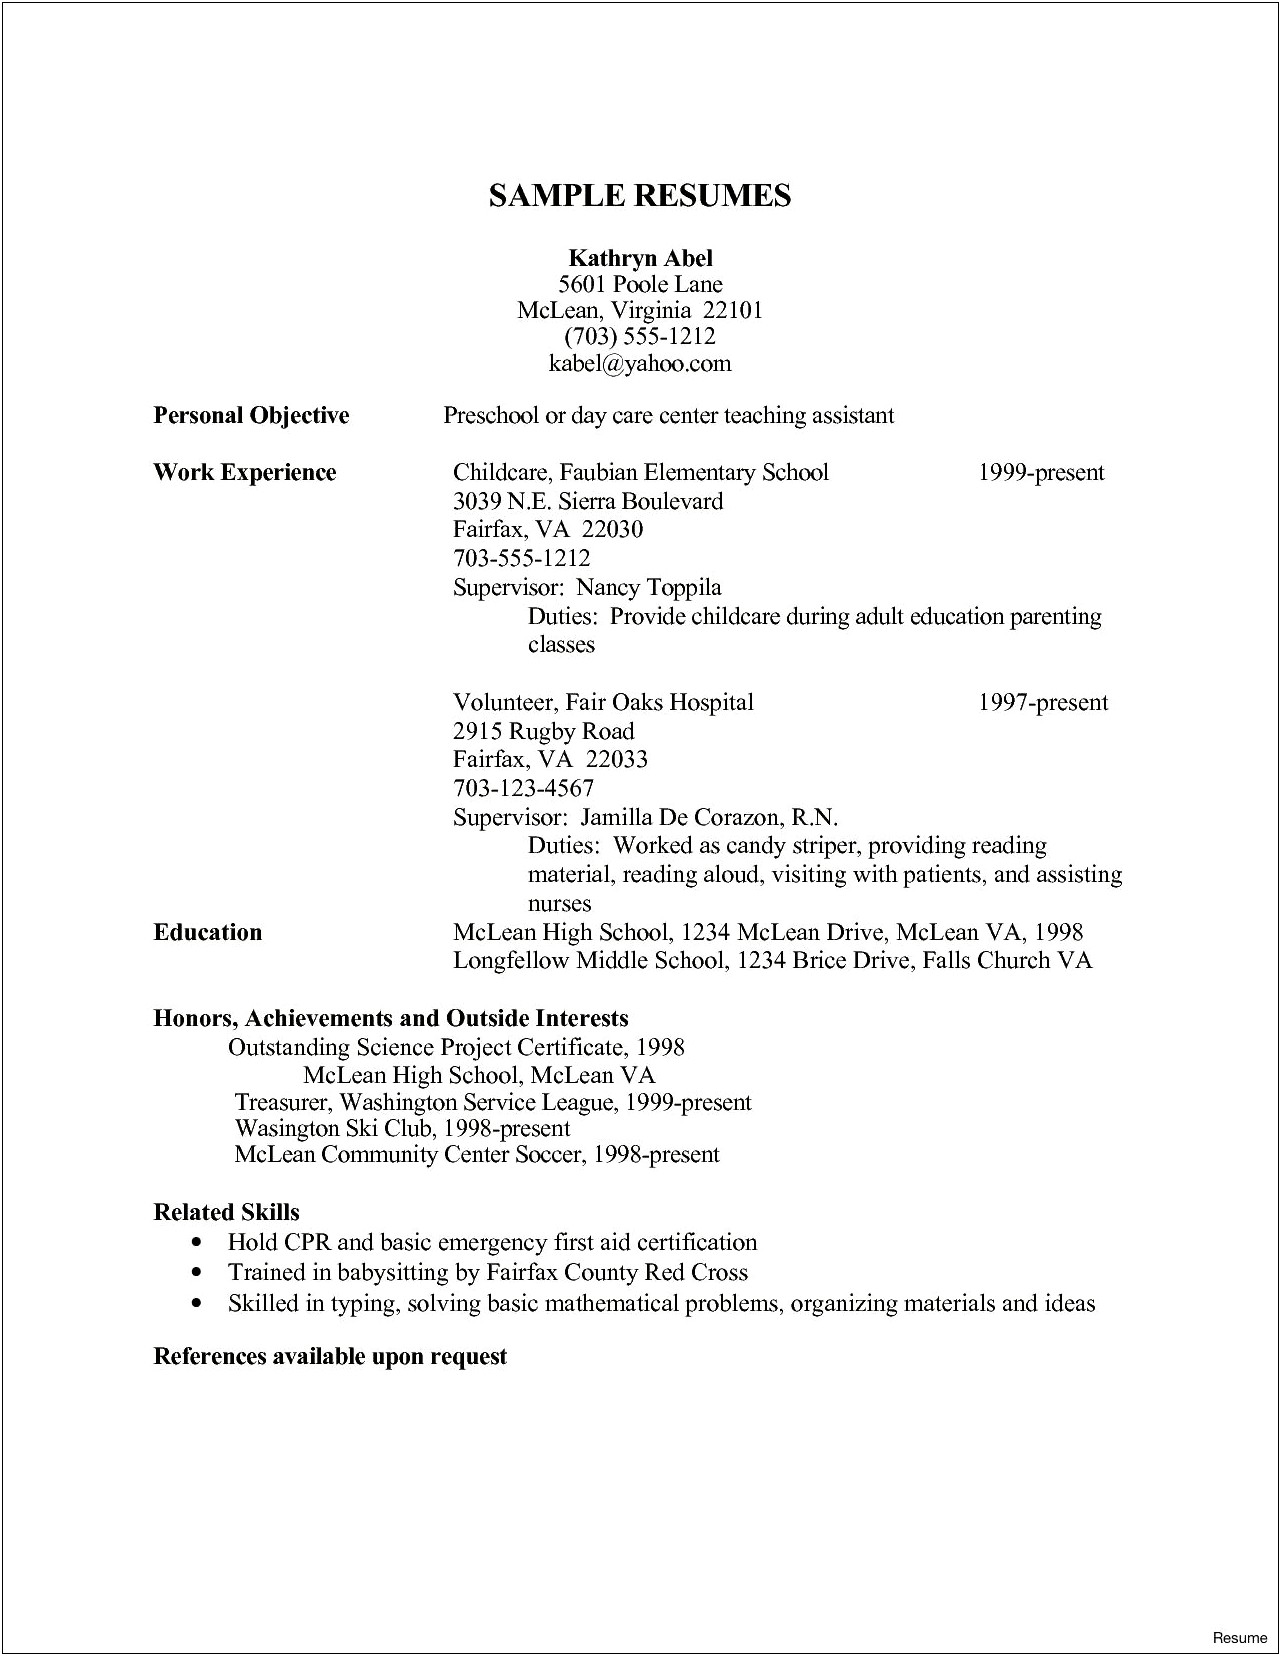 Resume Skills For Direct Care Worker